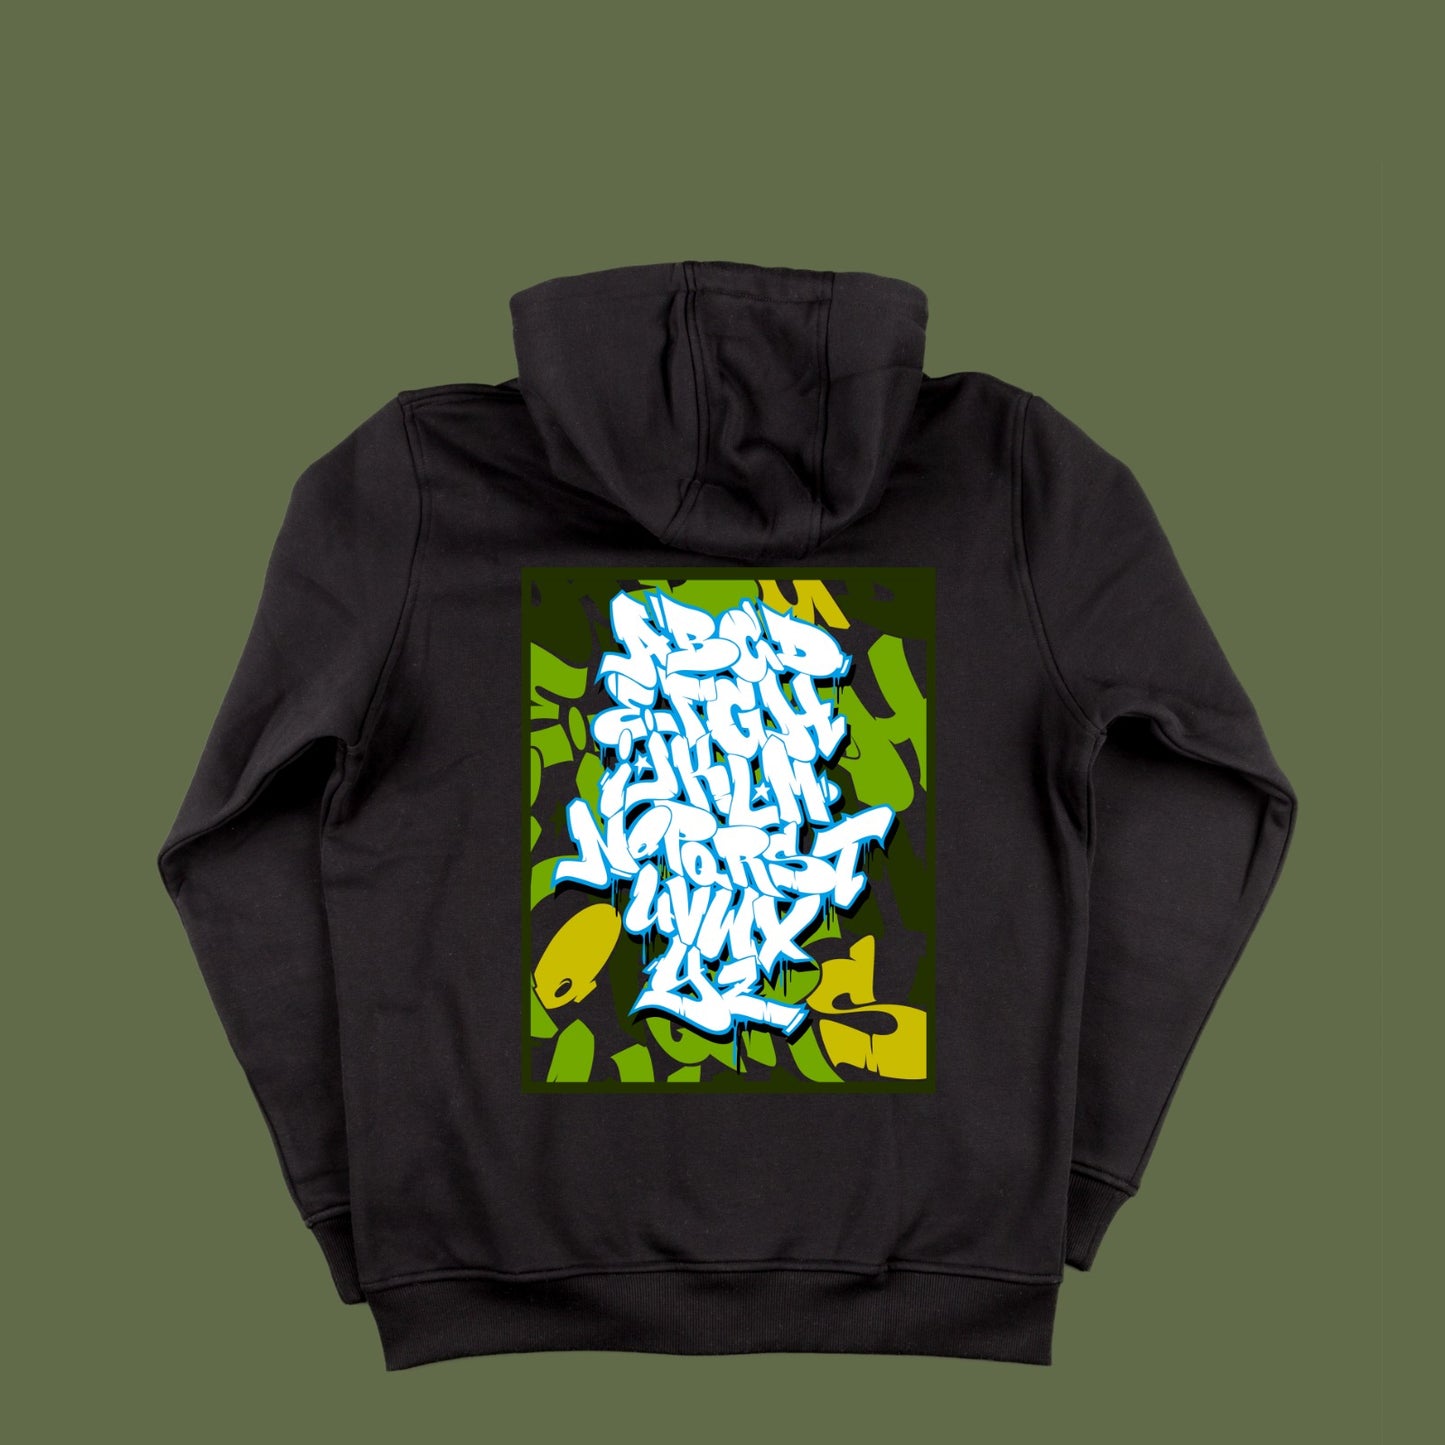 COLORED “ABC” Hoodie by ATOM